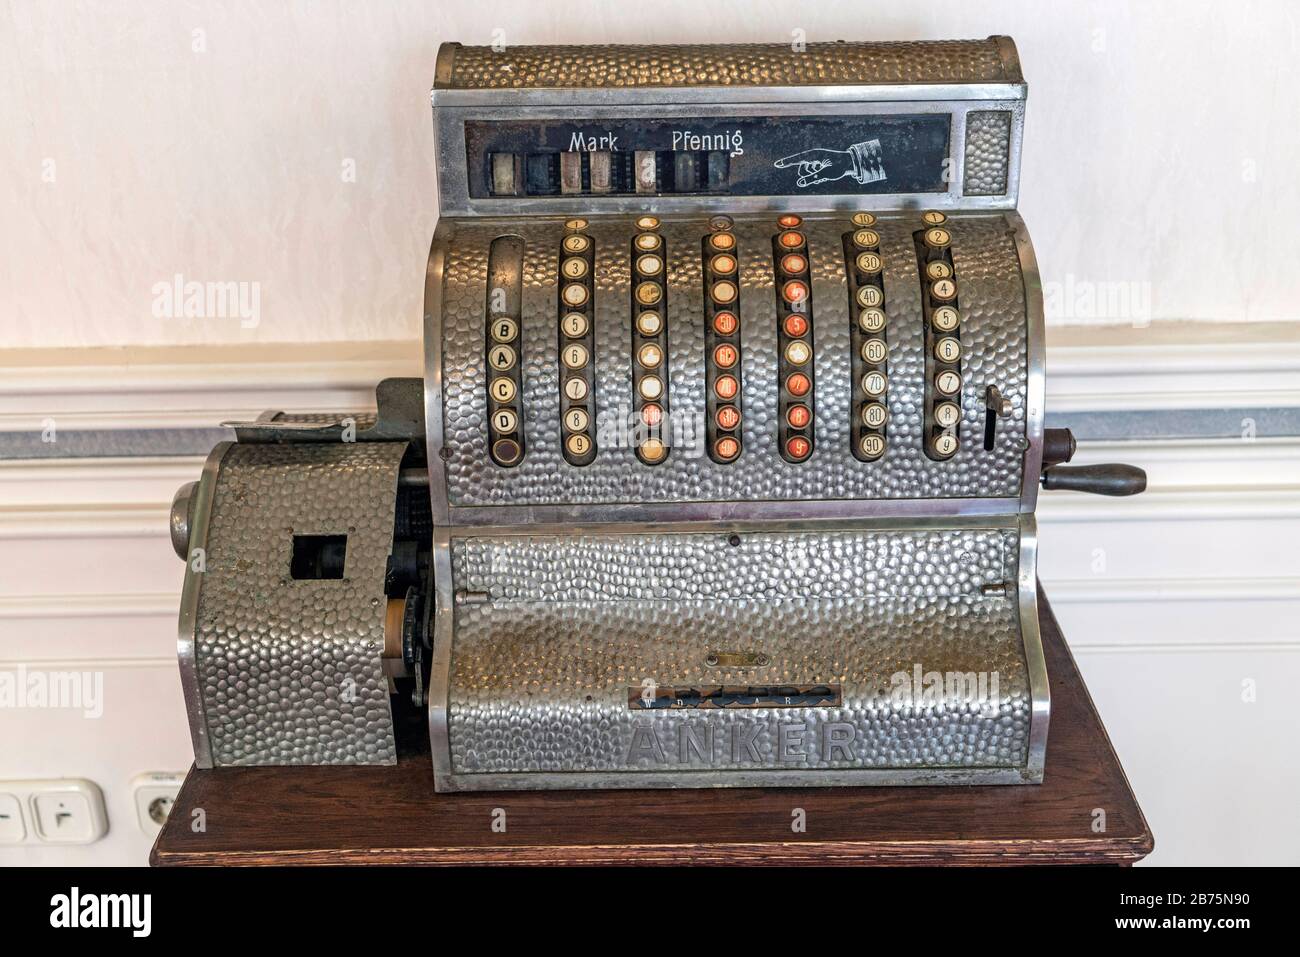 Hungary, Budapest, 08.09.2017. Historic cash register Anker in the coffee tusk in Budapest on 08.09.2017 [automated translation] Stock Photo